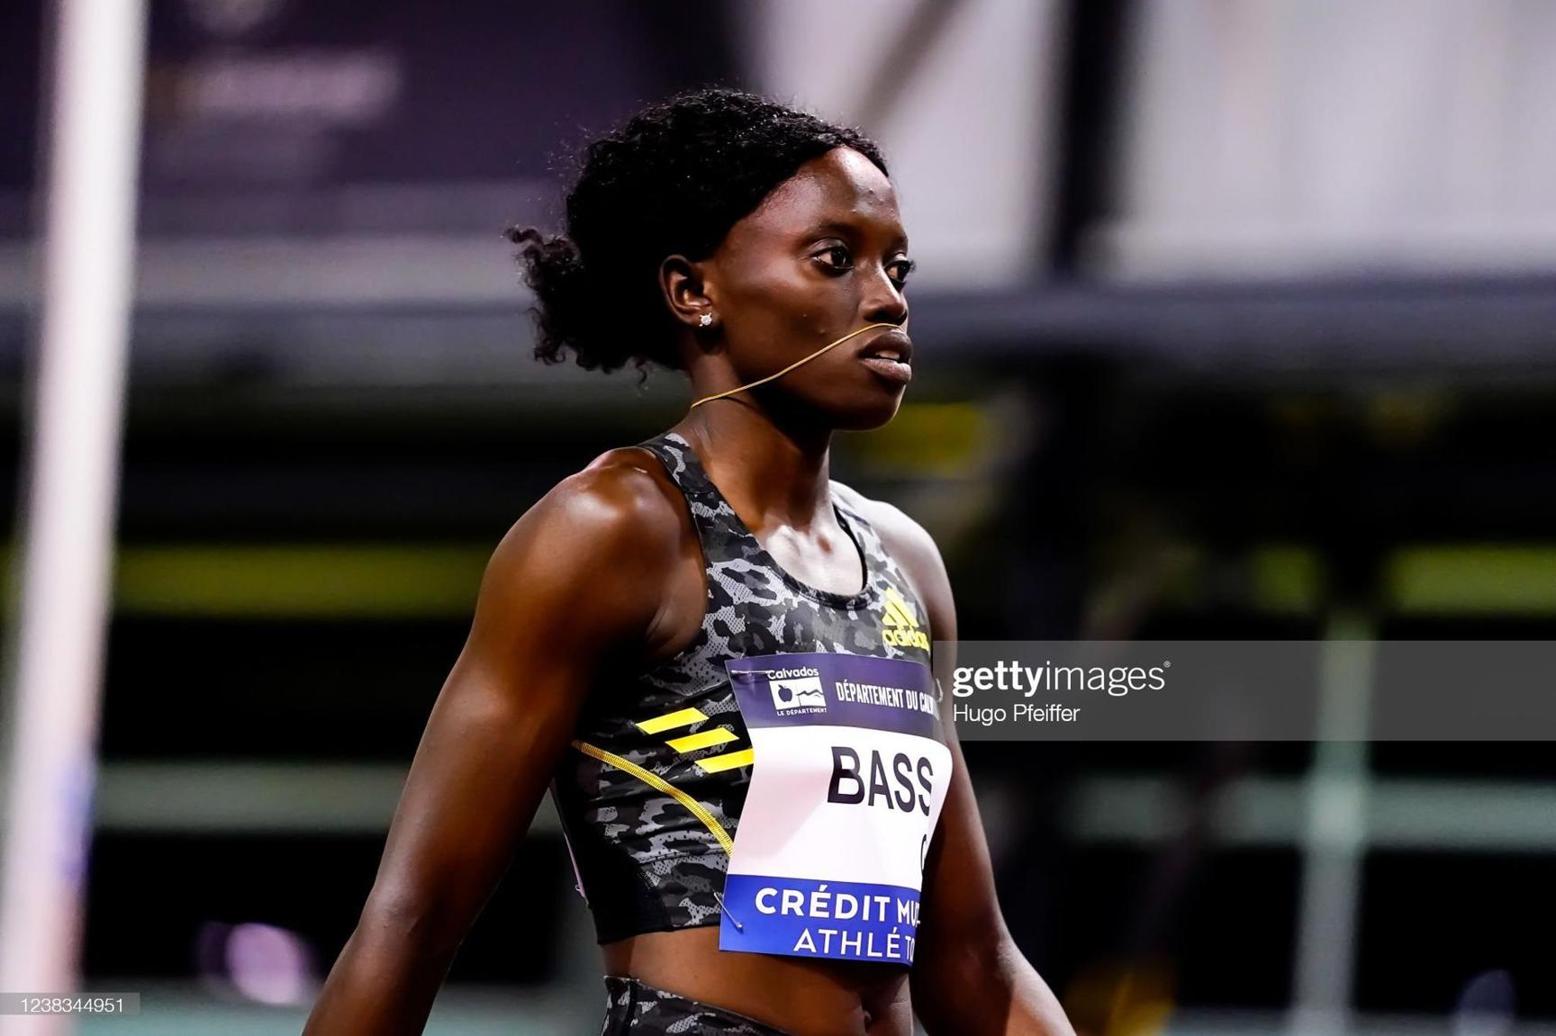 Gina Bass finishes 4th in European Indoor Championship